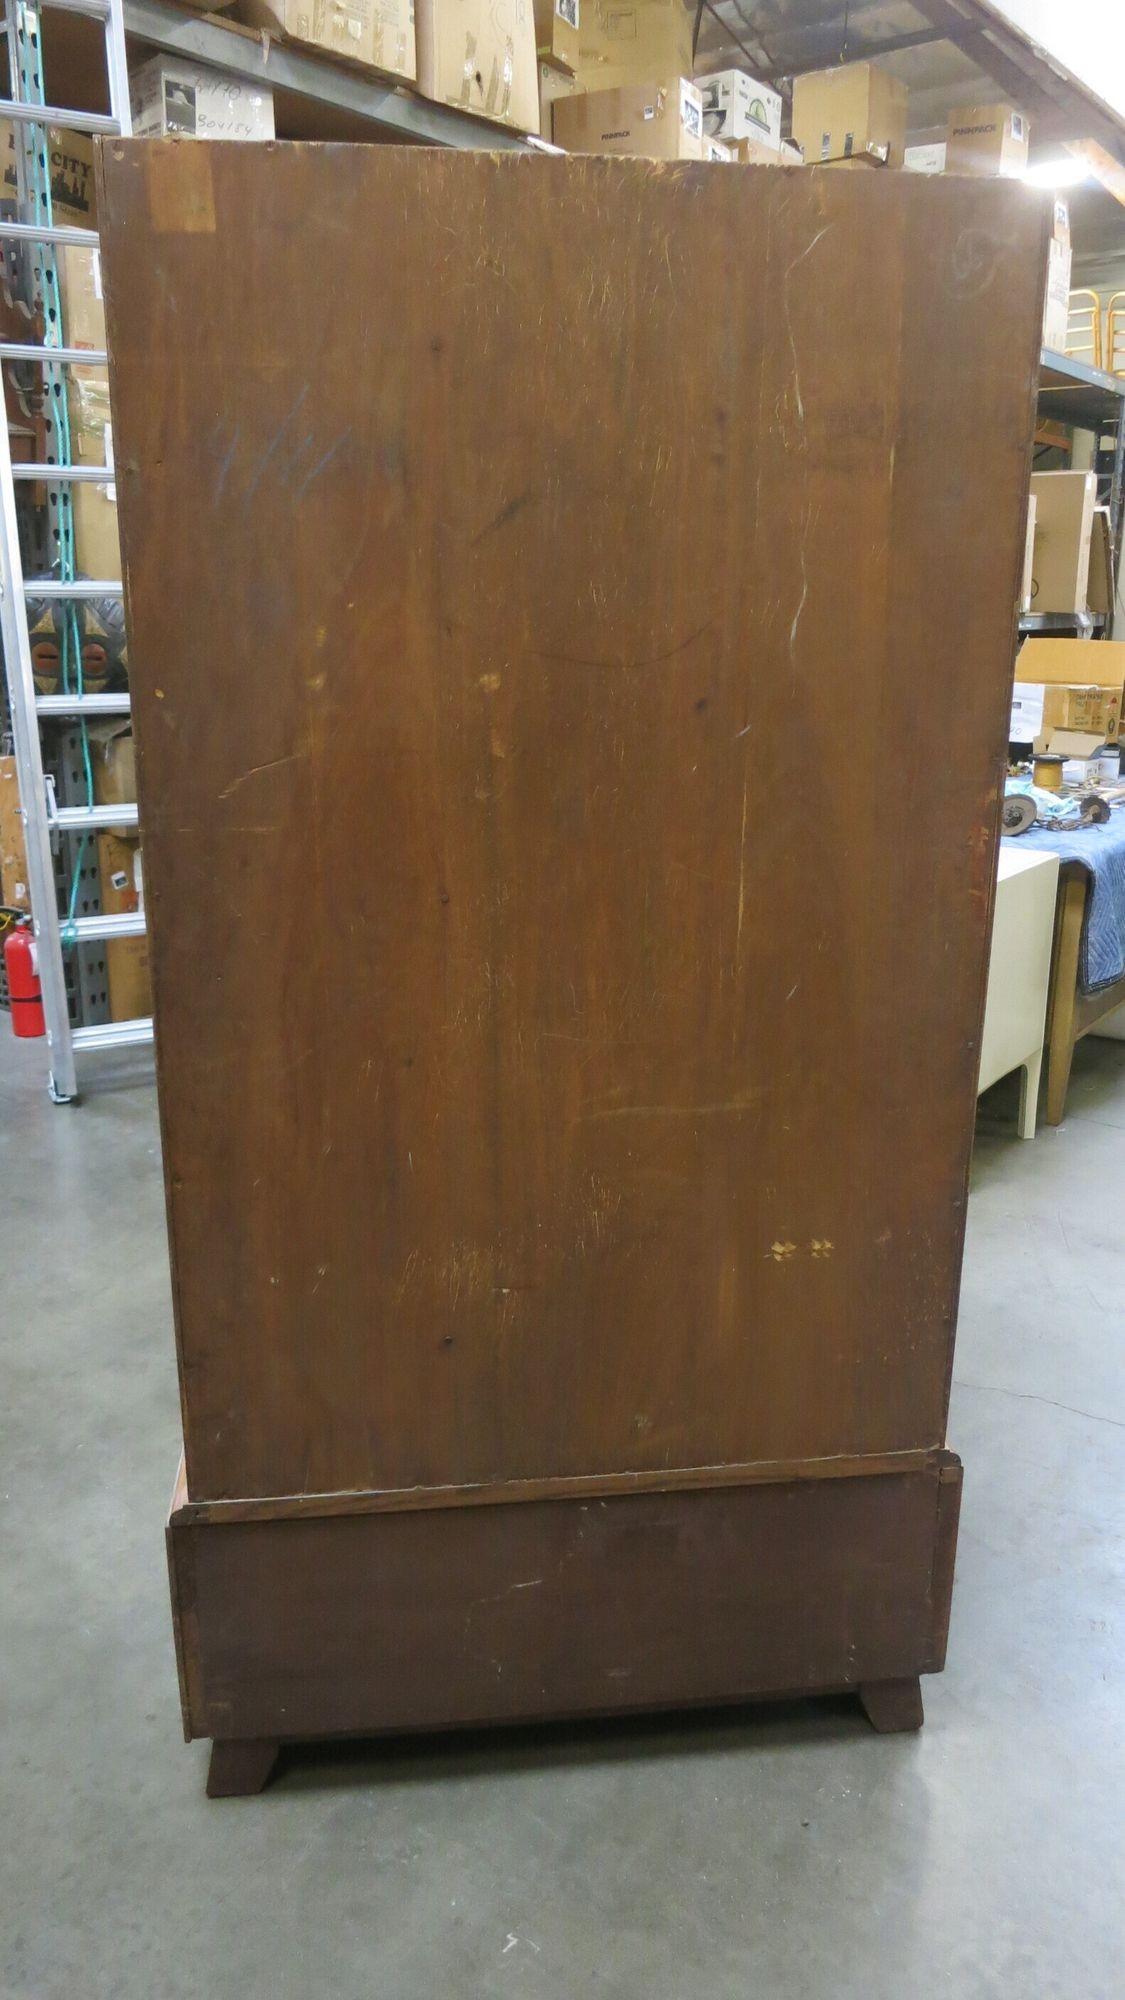 1930 Art Deco Gentleman's Walnut Armoire by Raven Furniture K&T t with original key and fully working locking doors. This wardrobe features a 